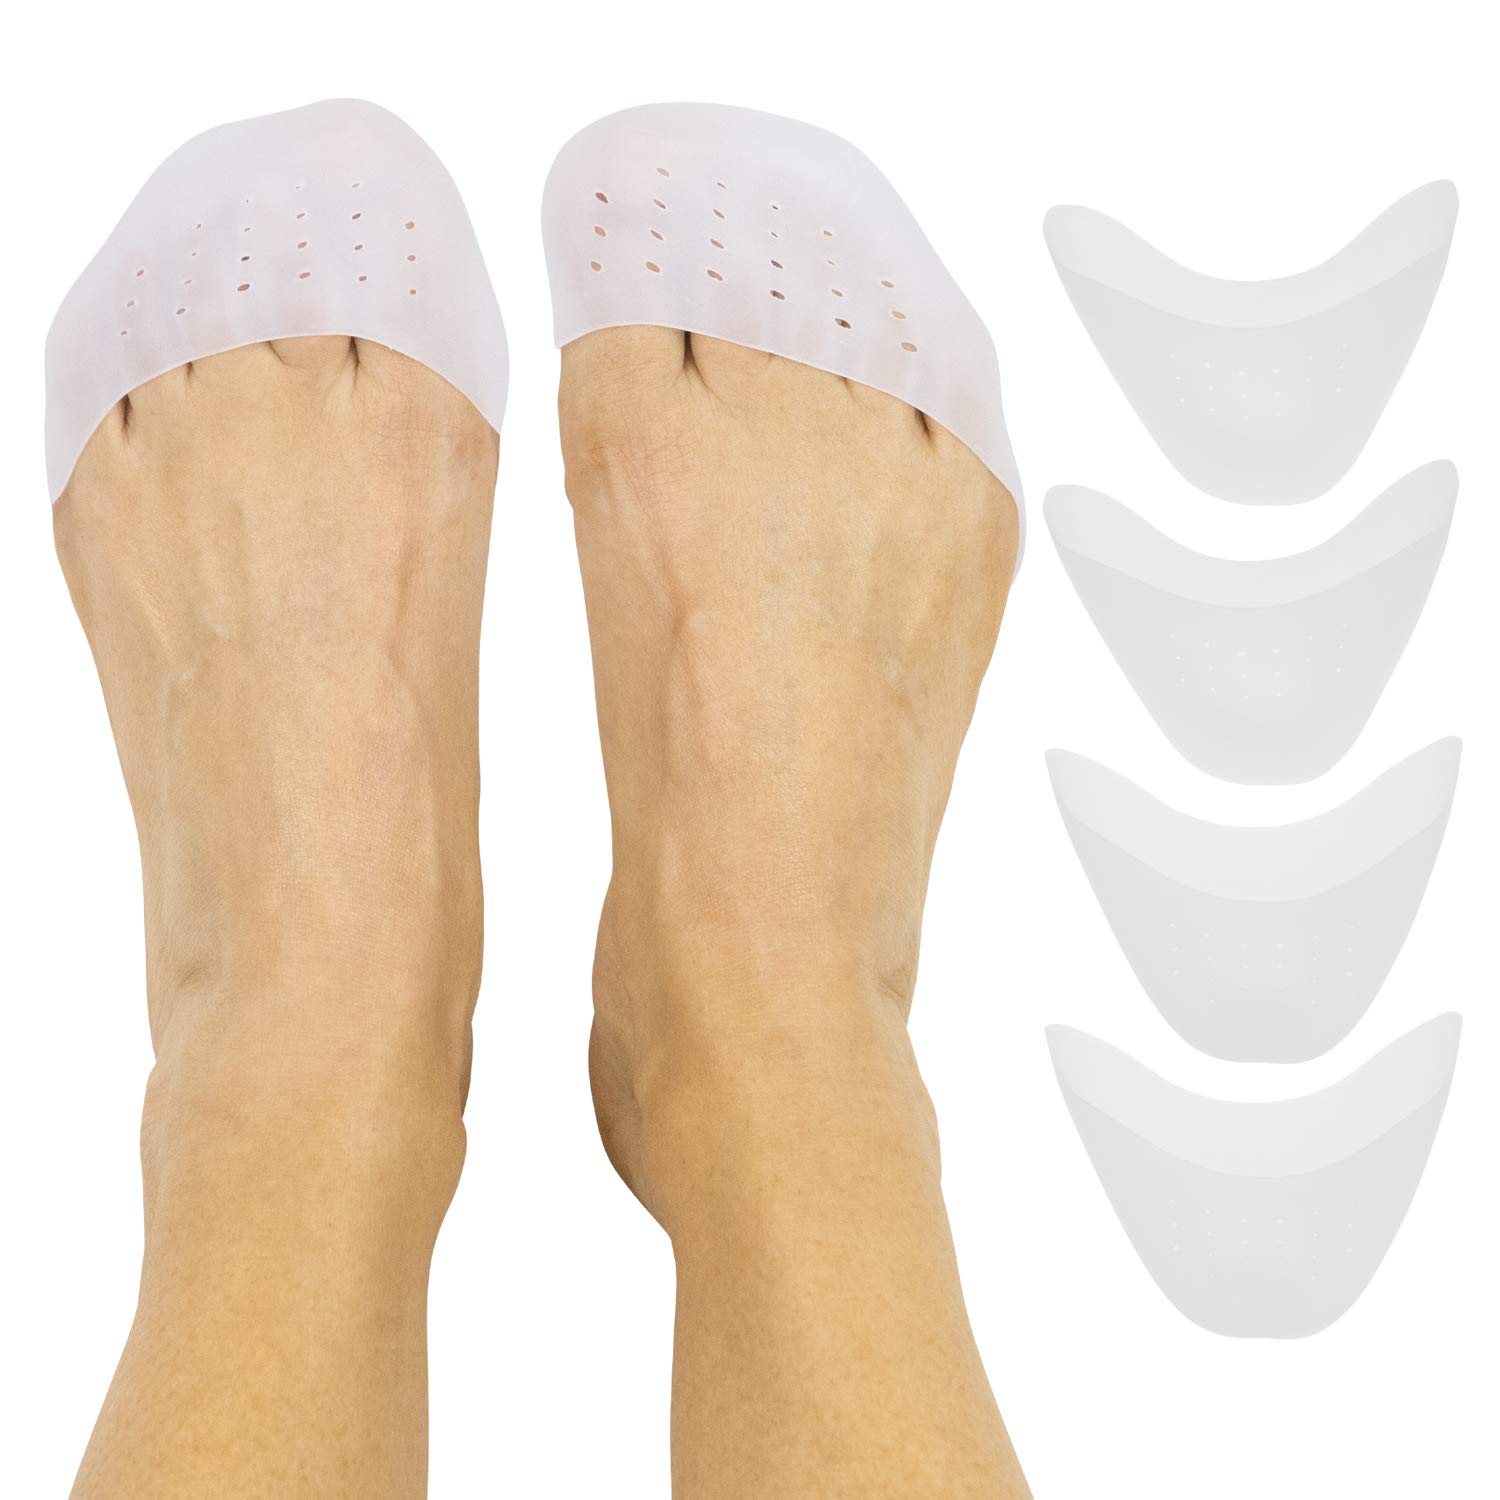 Vivesole Toe Pouches 4 PCS- Silicone Gel Sock Pads - Topper Cover